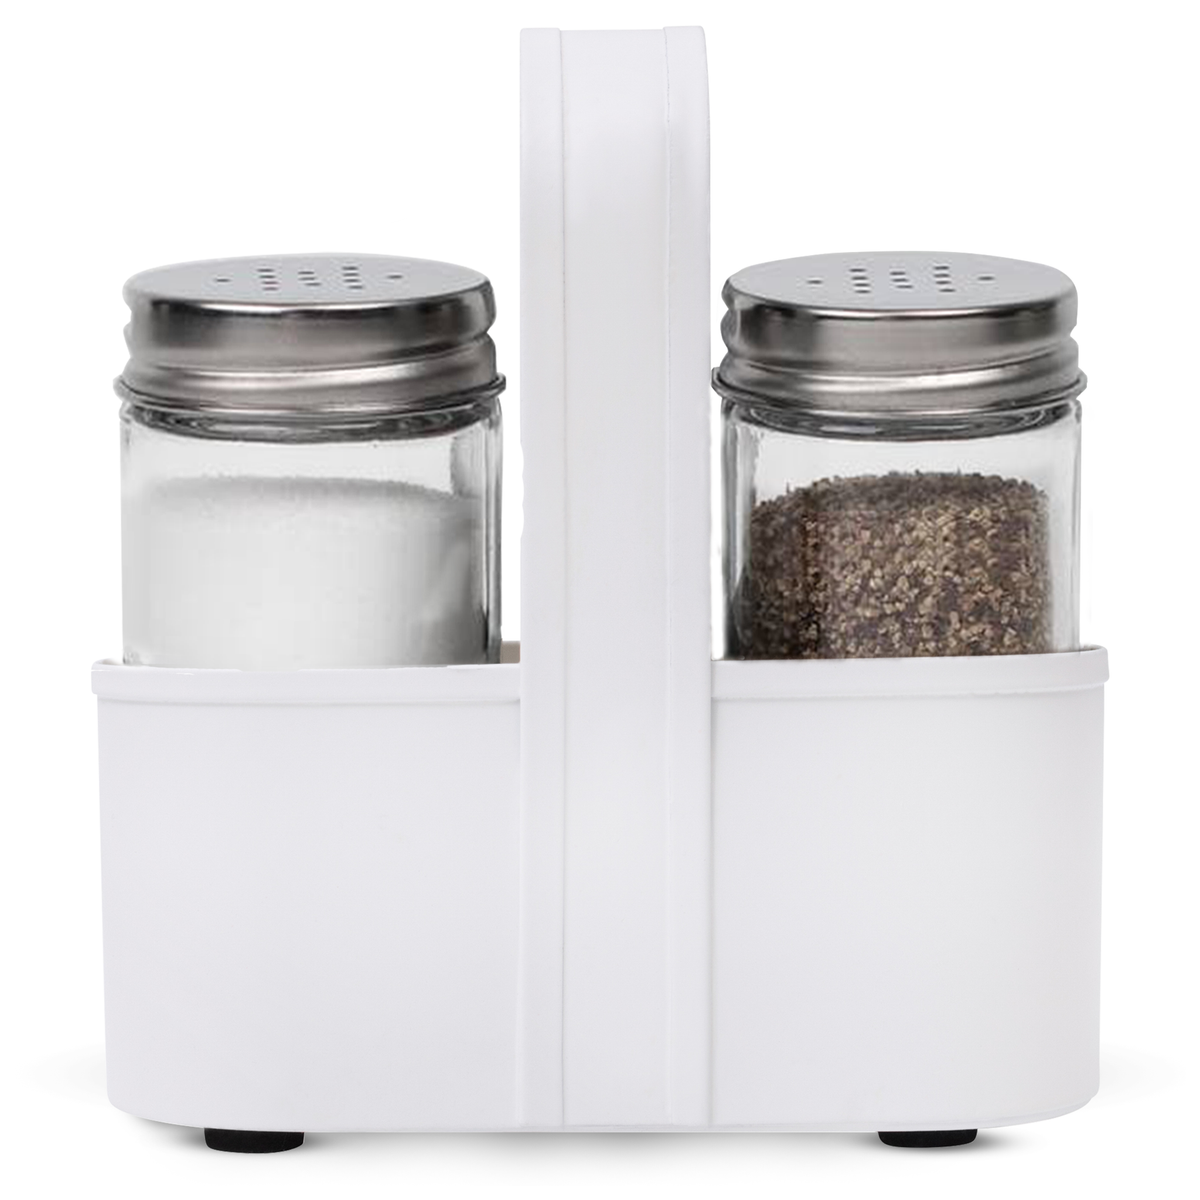 White salt and pepper shakers set by Saratoga Home